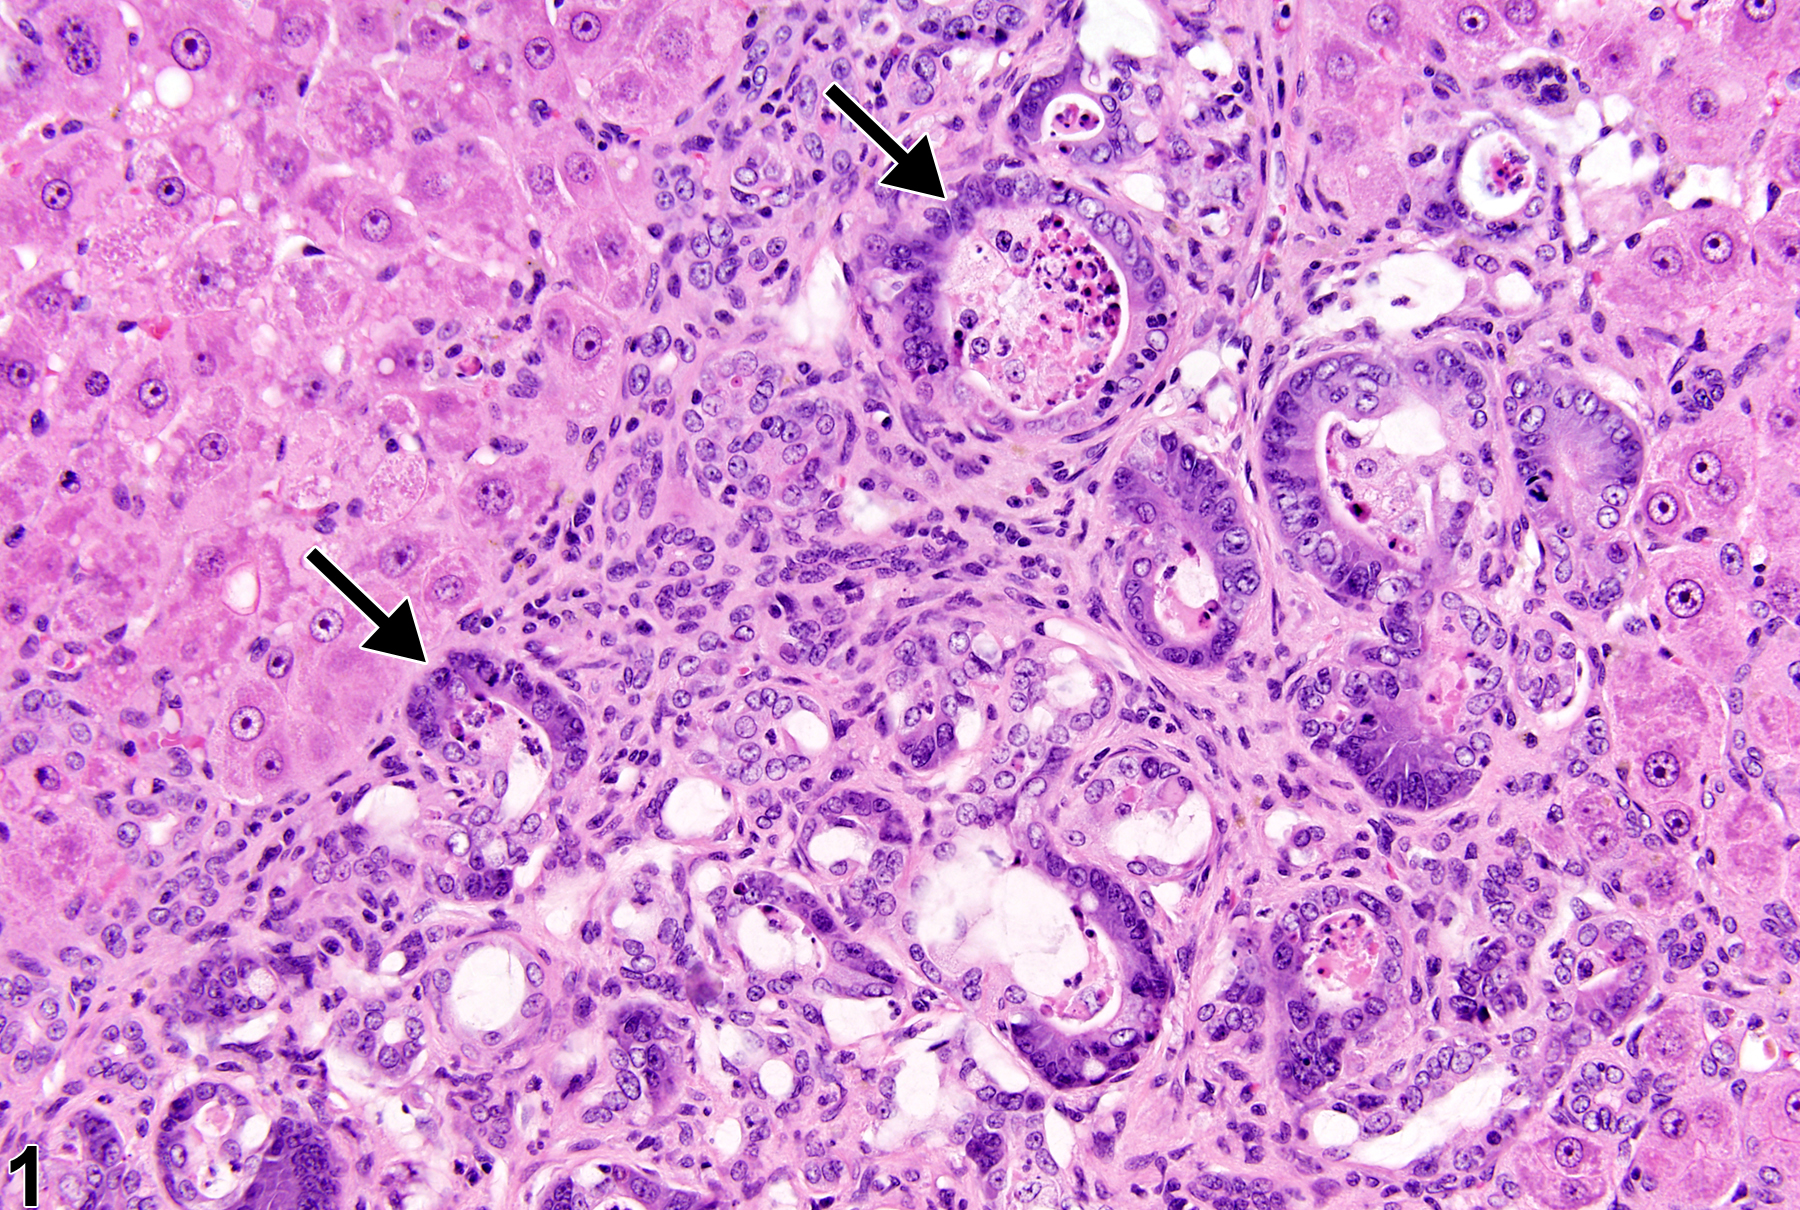 Image of cholangiofibrosis in the liver from a female Harlan Sprague-Dawley rat in a chronic study